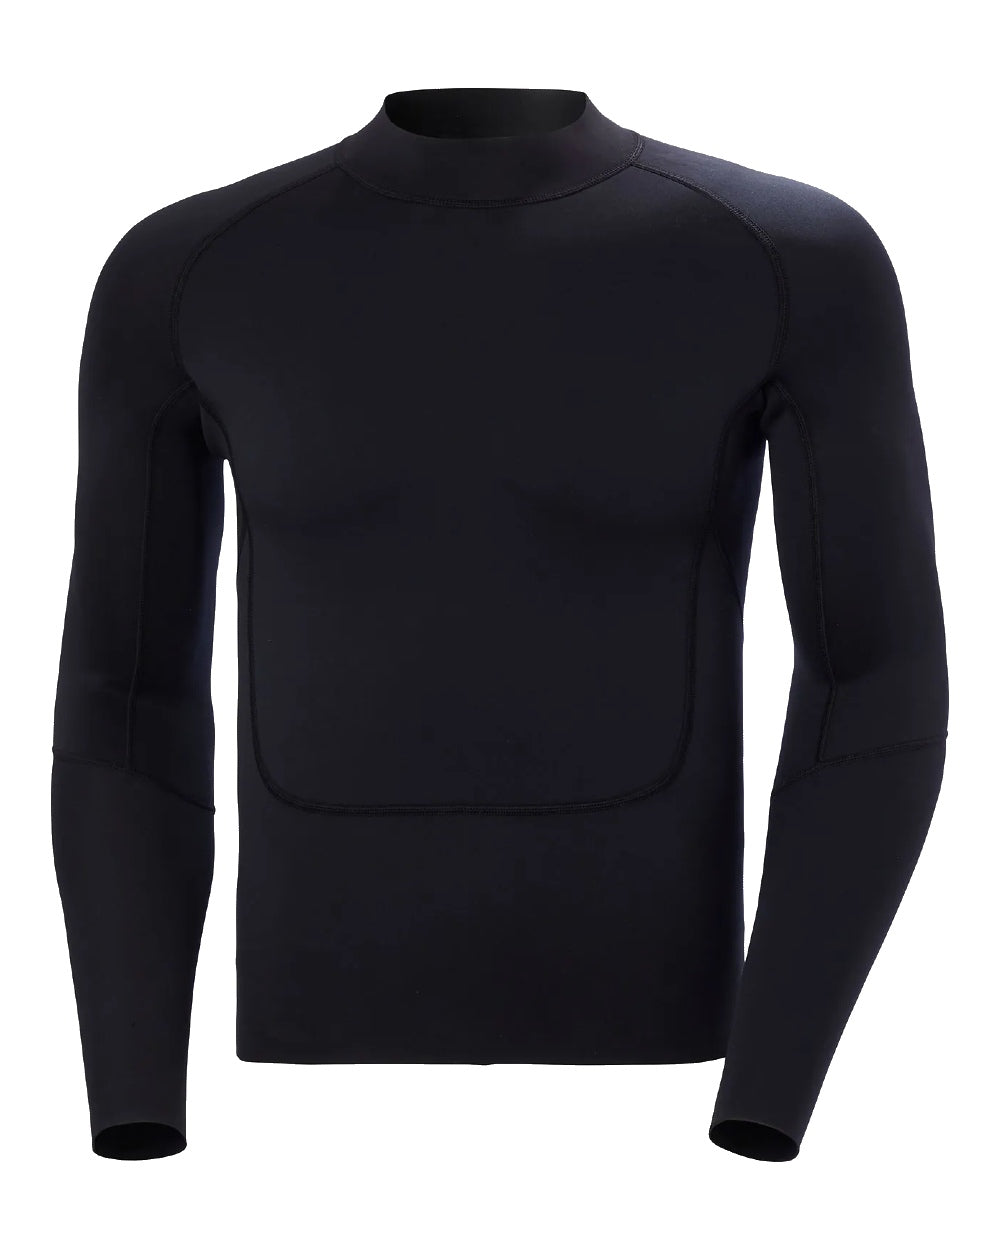 Black coloured Helly Hansen Mens Waterwear Sailing Top 2.0 on a white background 